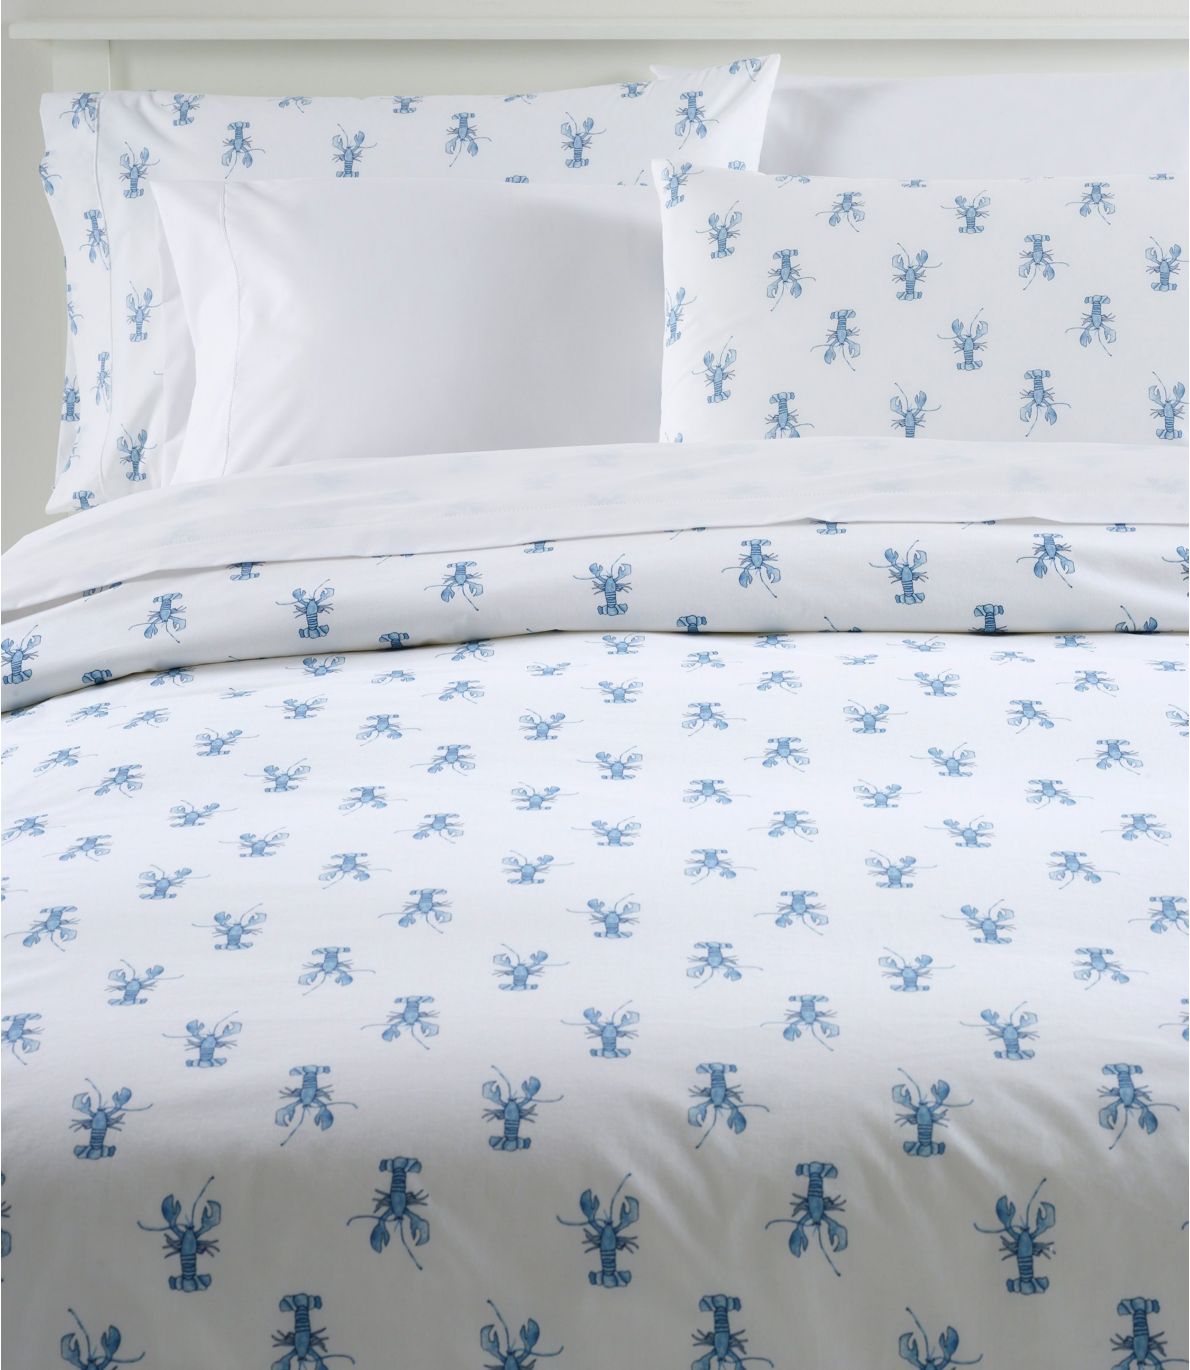 Sara Fitz™ Lobster Percale Comforter Cover Collection